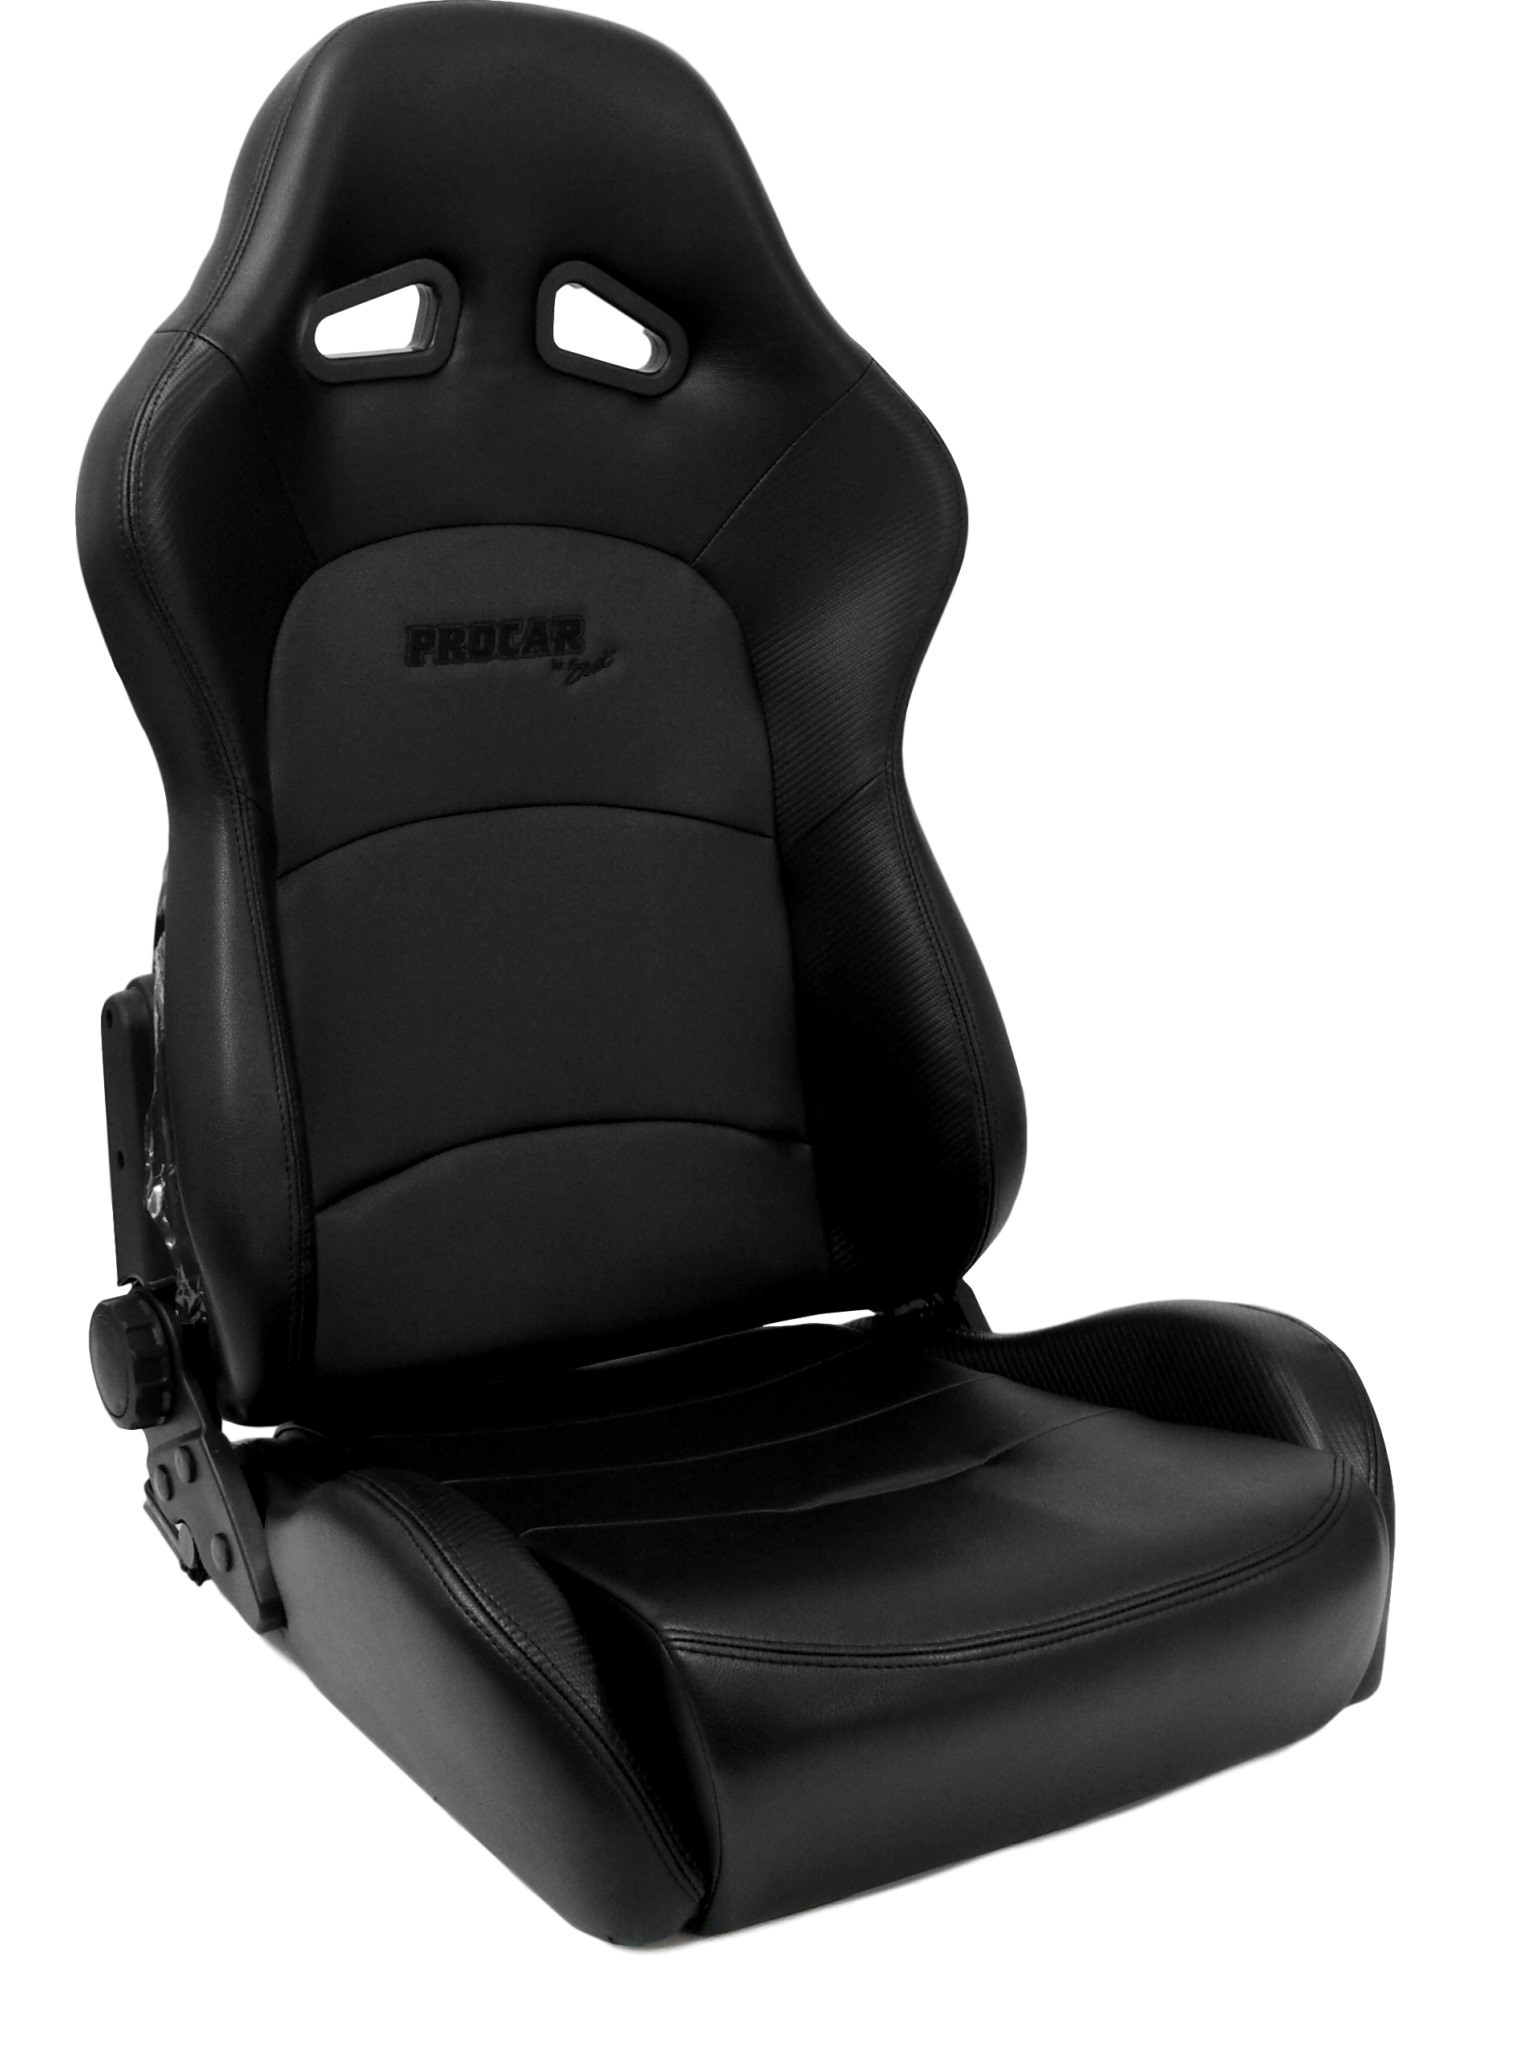 ProCar by Scat 80-1780-51 Black Vinyl Racing Drifter Fixed Back Common Seat 